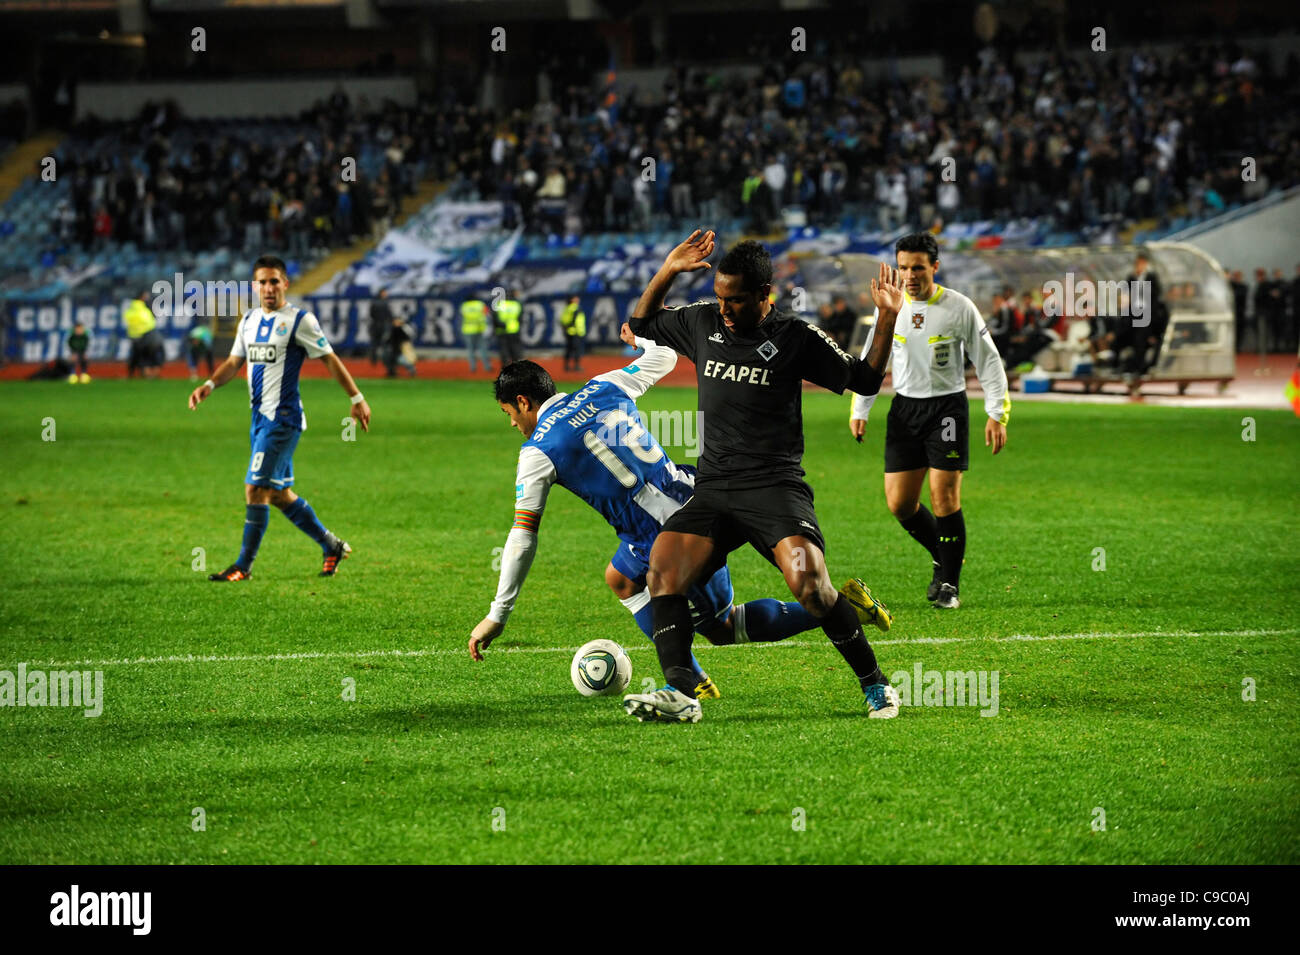 Futebol Clube do Porto player Hulk is fouled during a football match Stock Photo